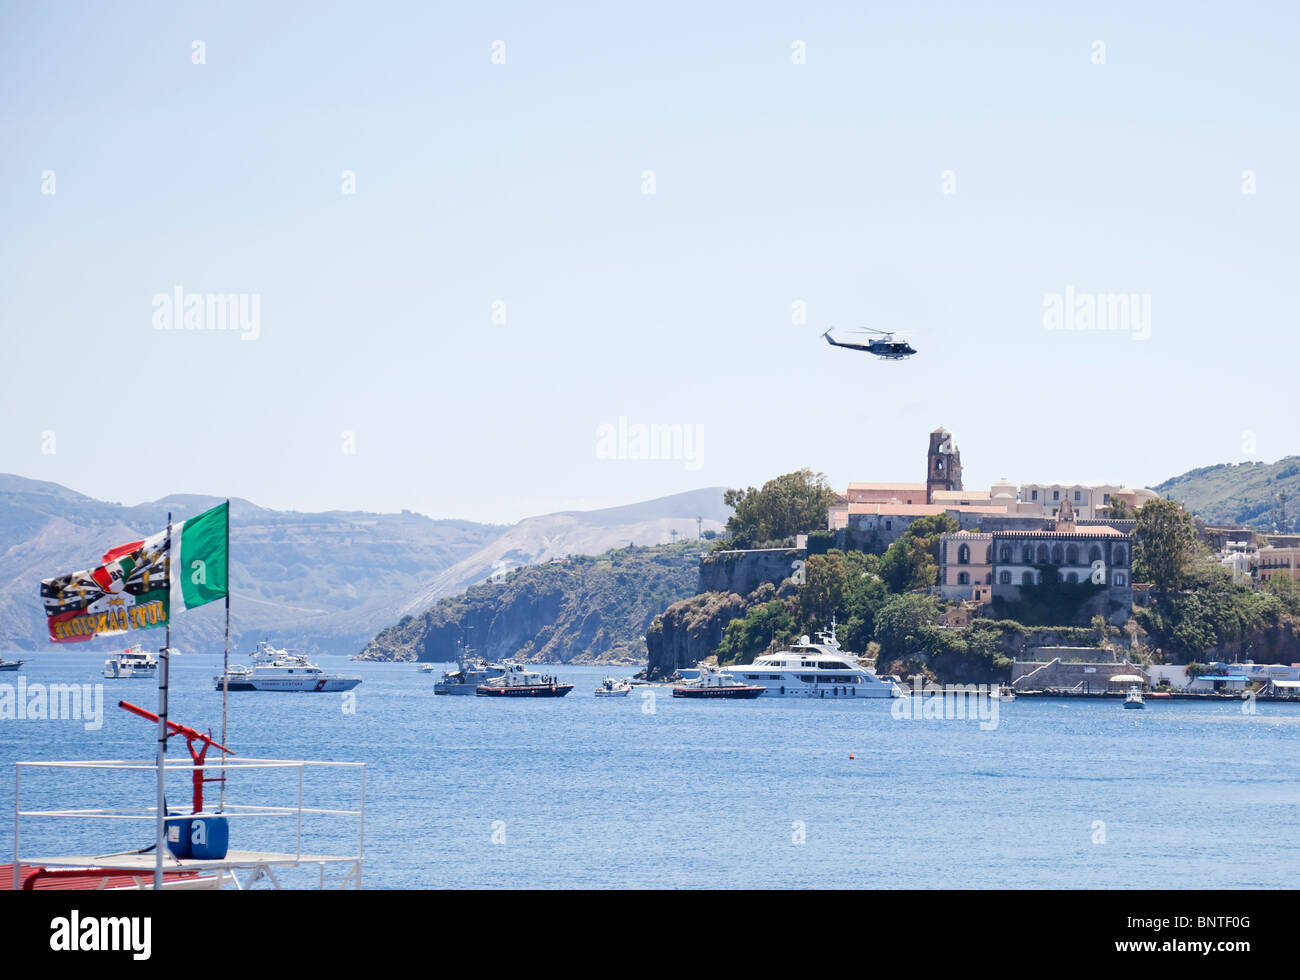 Italian police escorting and detained a superyacht with a helicopter and some vessels in Lipari of Aeolian Islands. Stock Photo